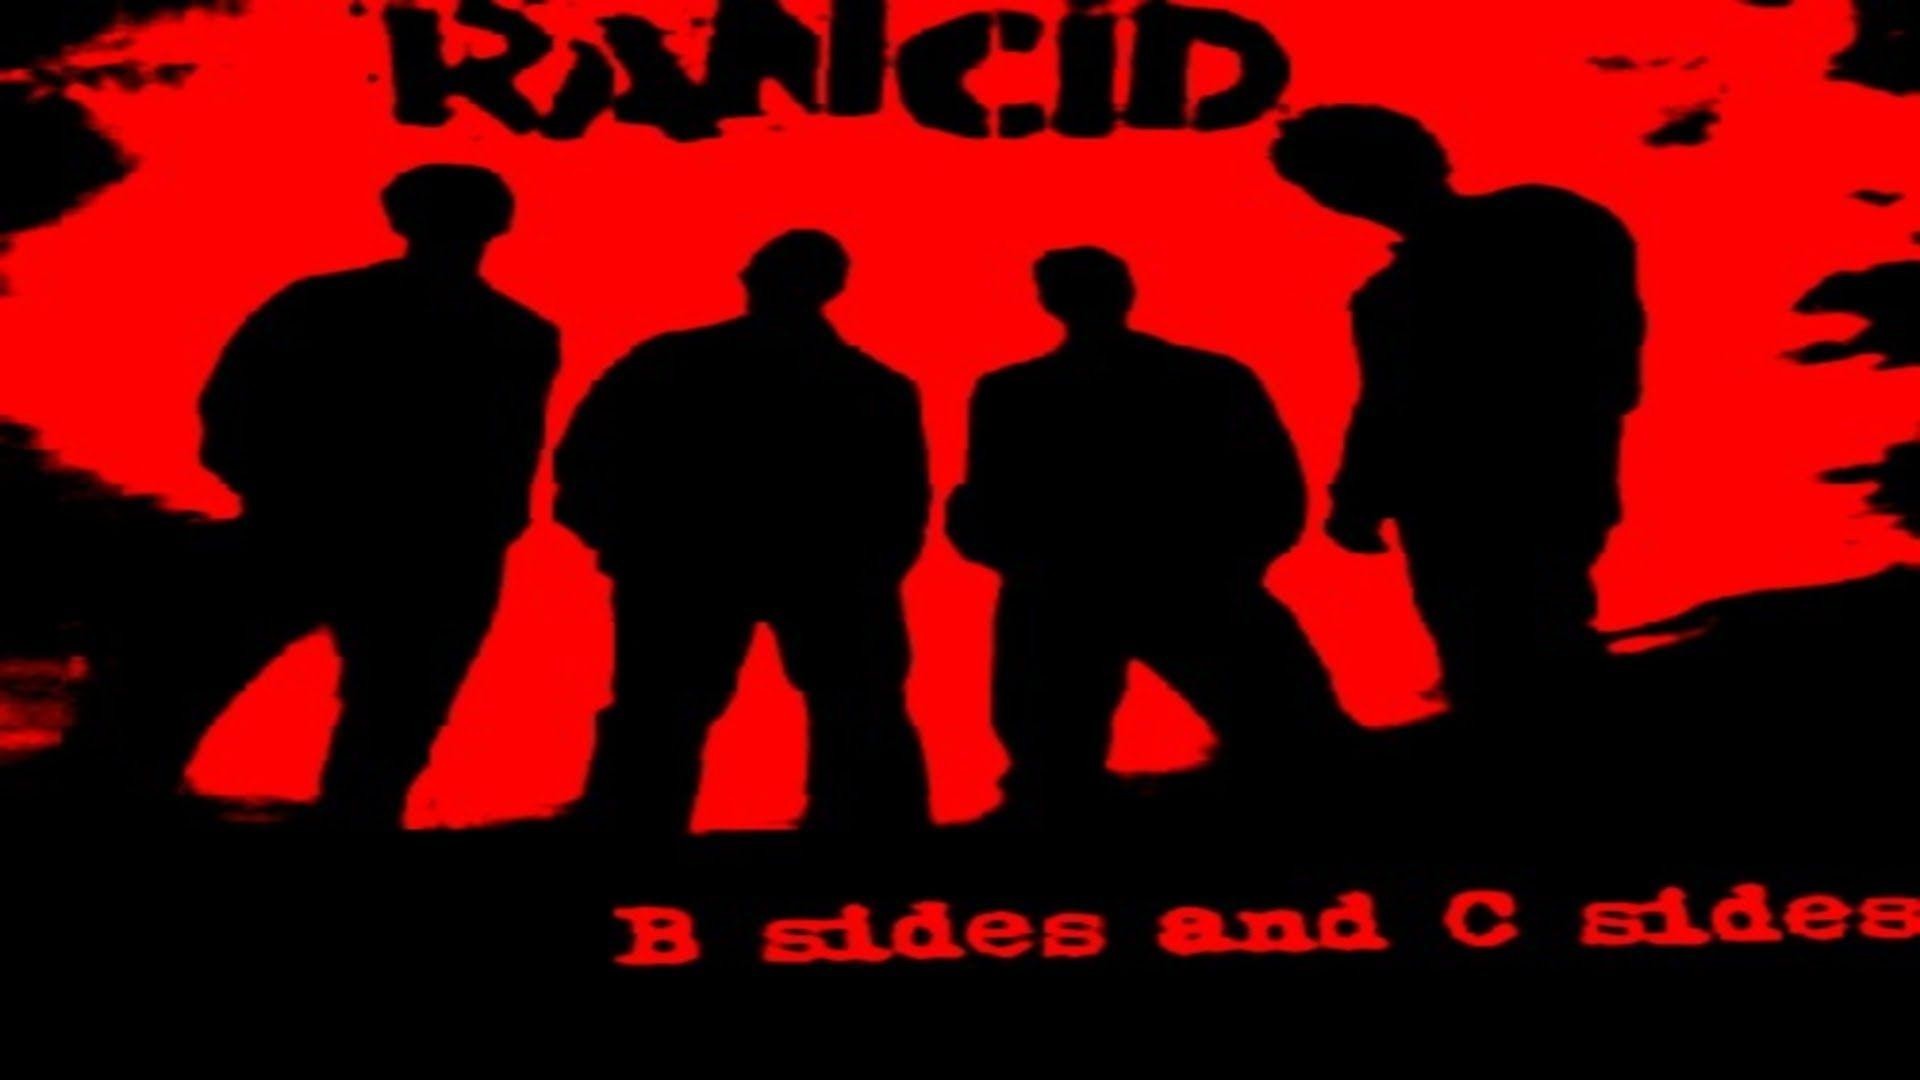 1920x1080 Rancid Photos - Rancid Images: Ravepad - the place to rave about .